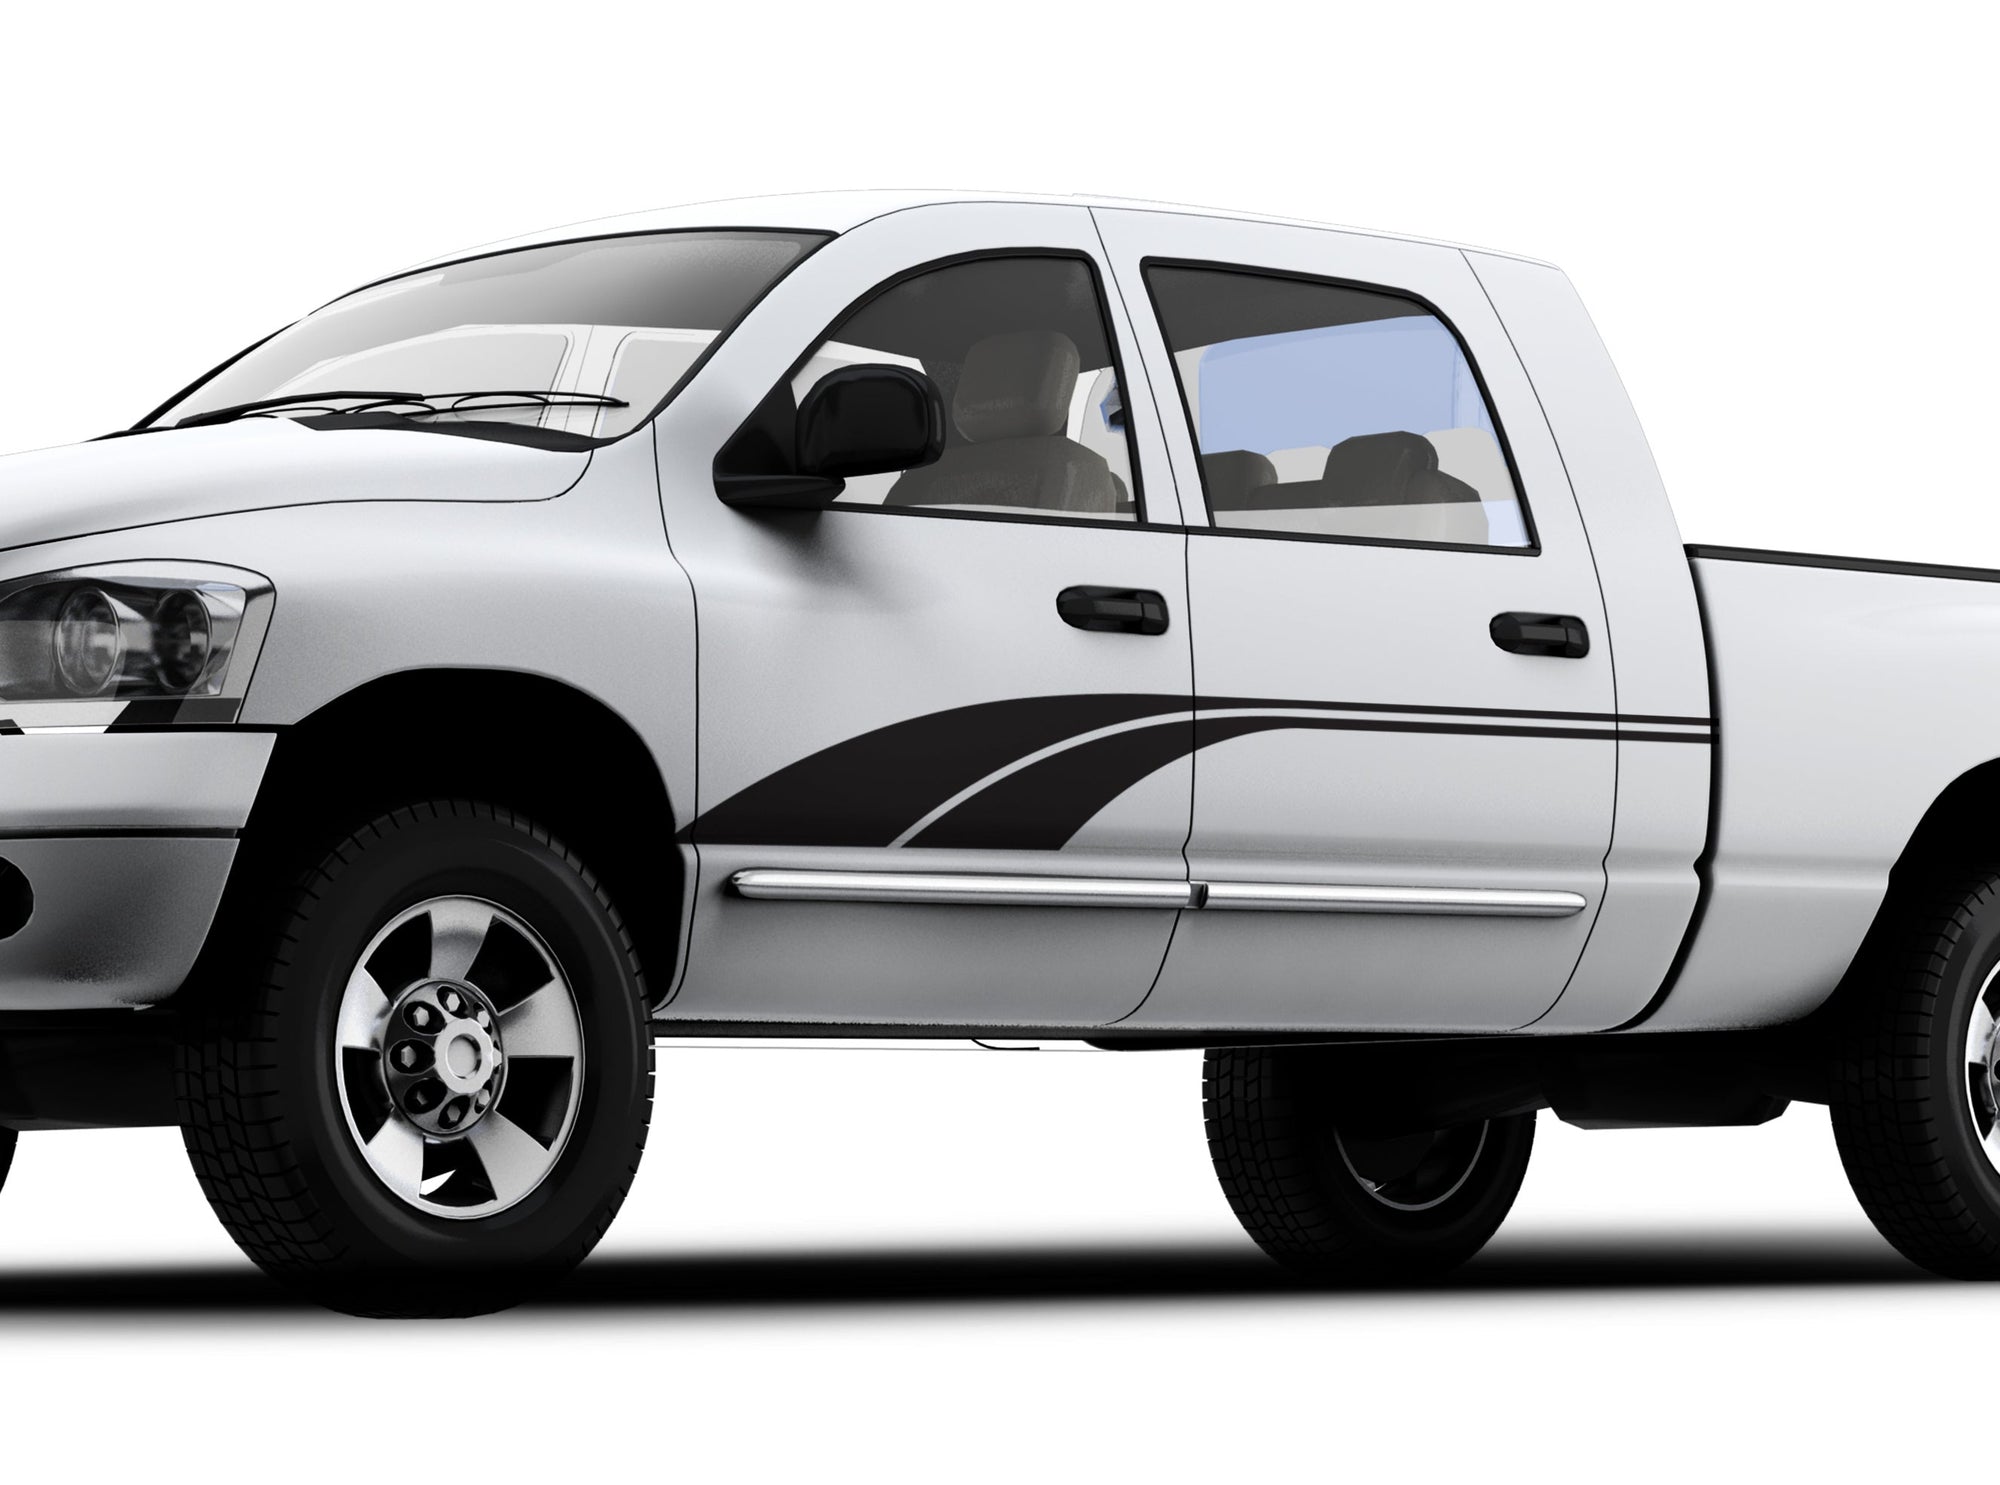 curved vinyl stripe decal on the side of white truck